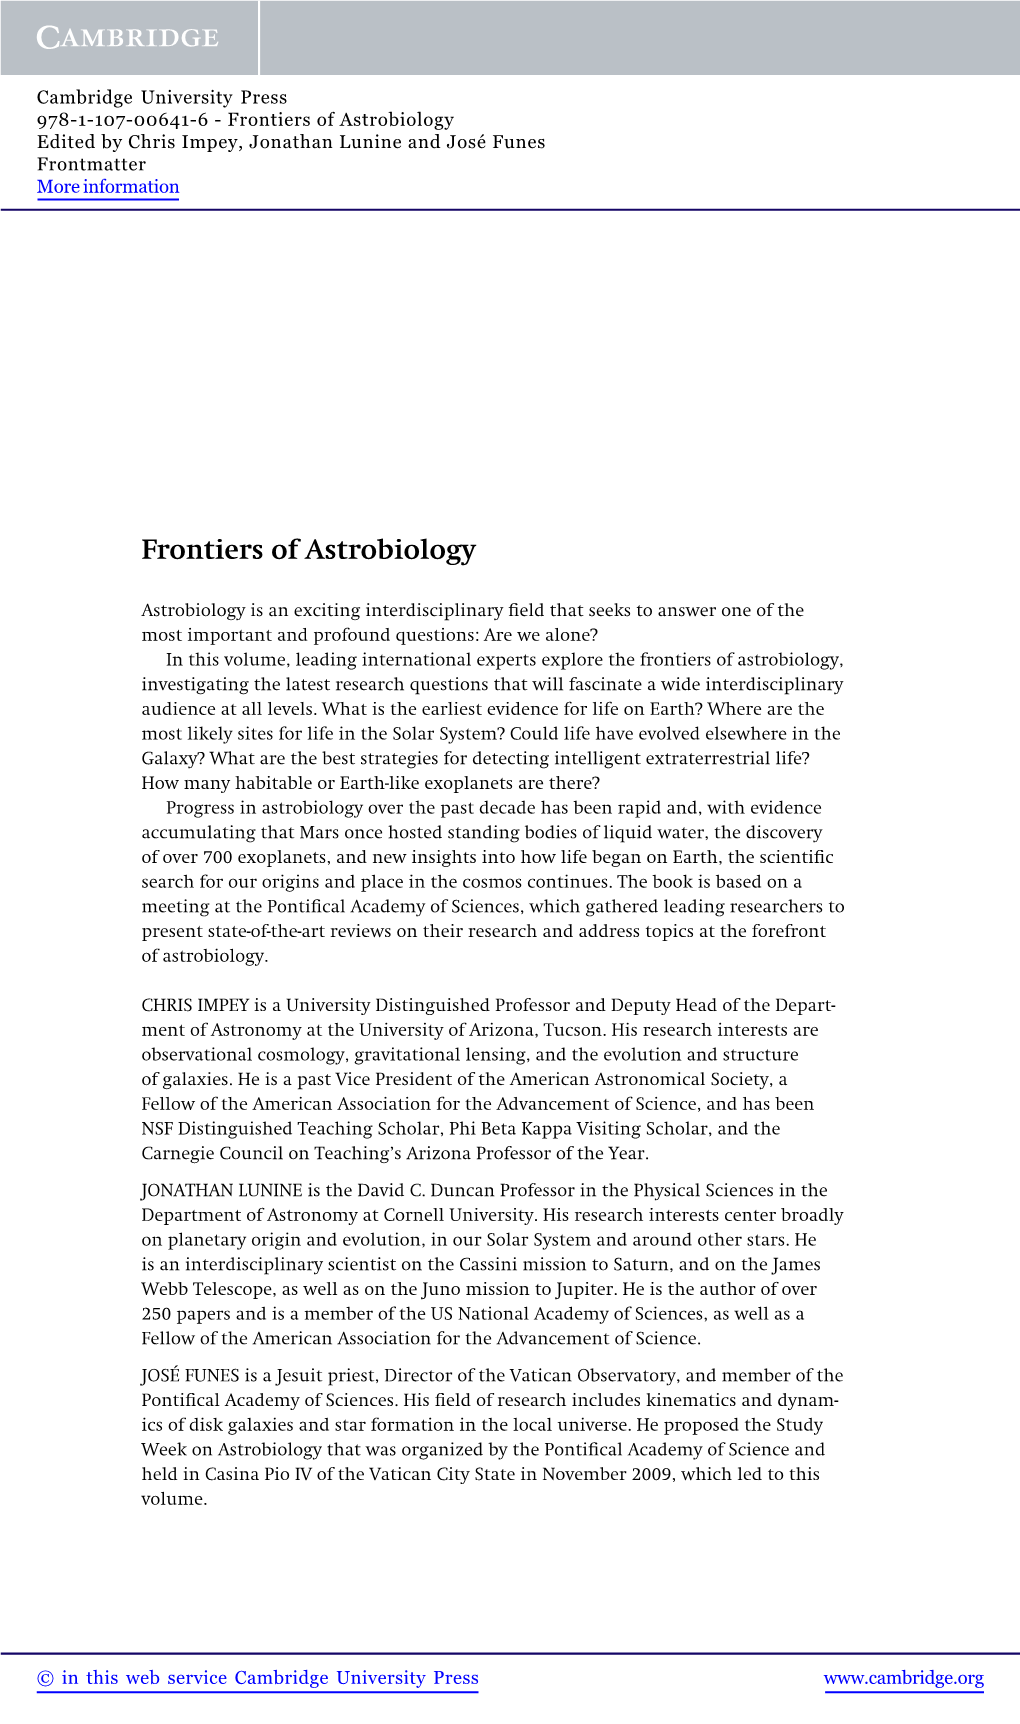 Frontiers of Astrobiology Edited by Chris Impey, Jonathan Lunine and José Funes Frontmatter More Information